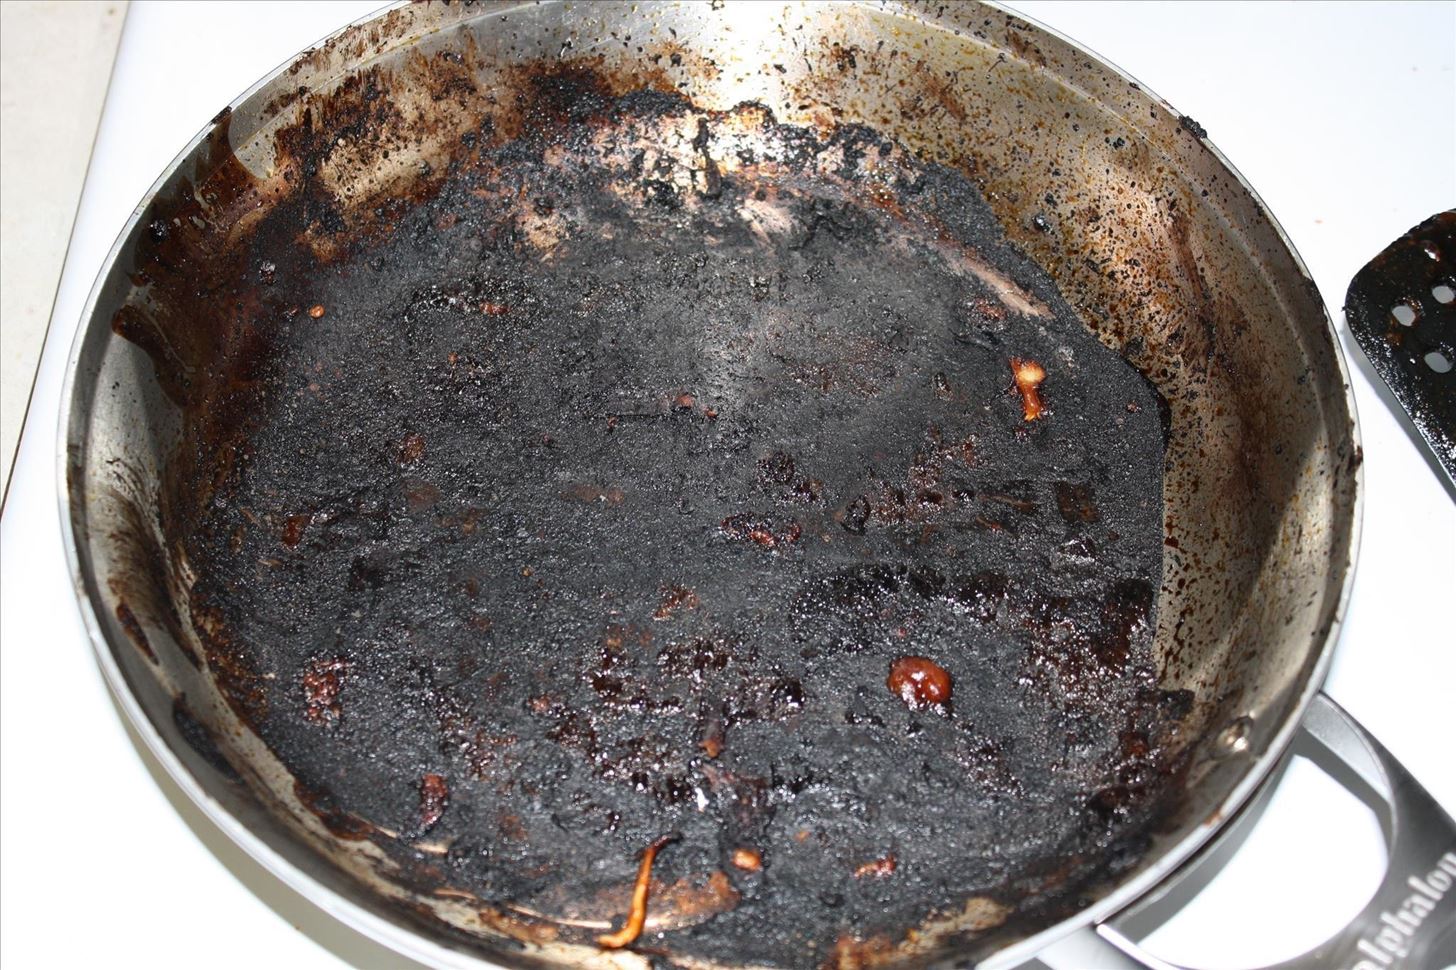 How to Clean "Uncleanable" Scorched Spots from Pots & Pans